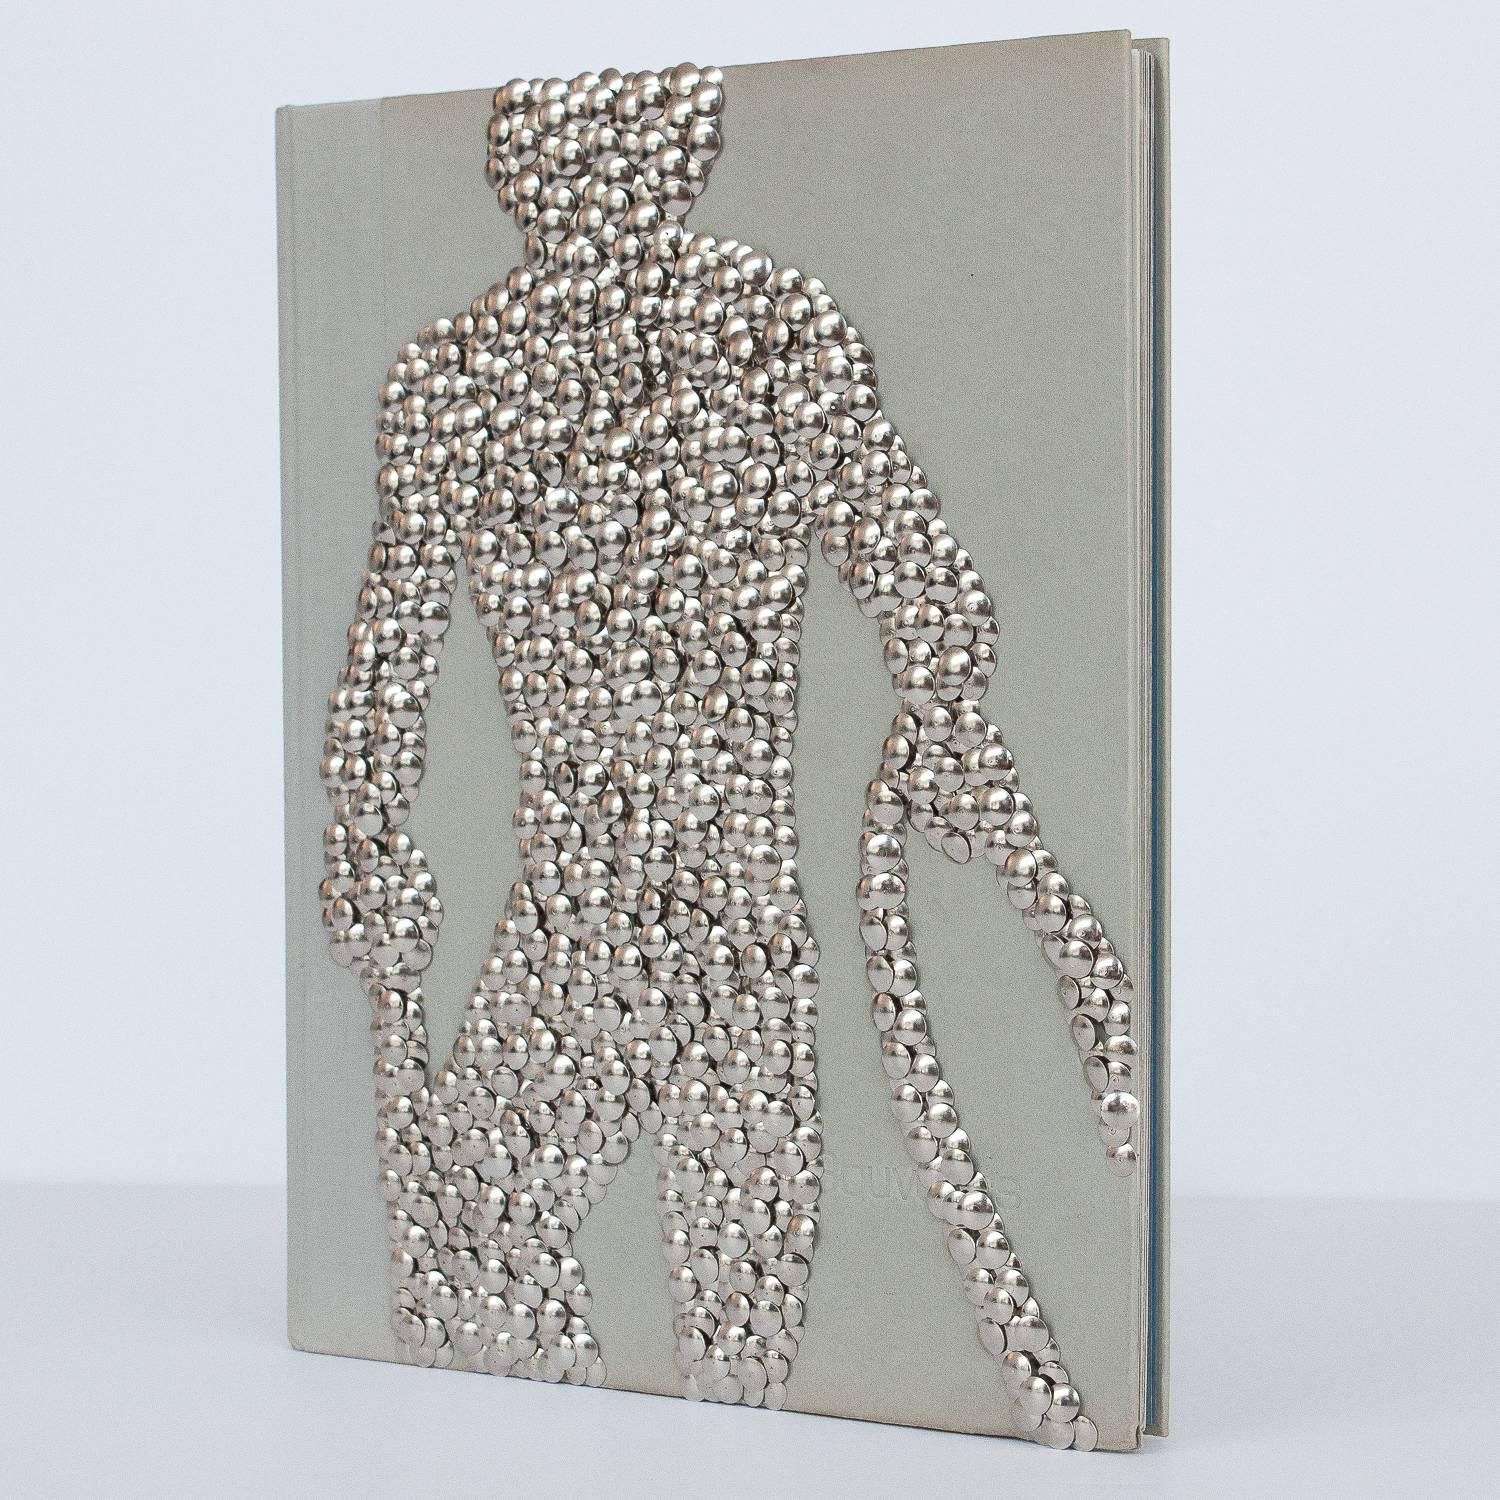 Hand gilded copy of Ken Haak's Summer Souvenirs photography art book with silver thumbtacks forming a male nude on the front cover by Chicago artist Brian Stanziale.

Sculptural and playful, 